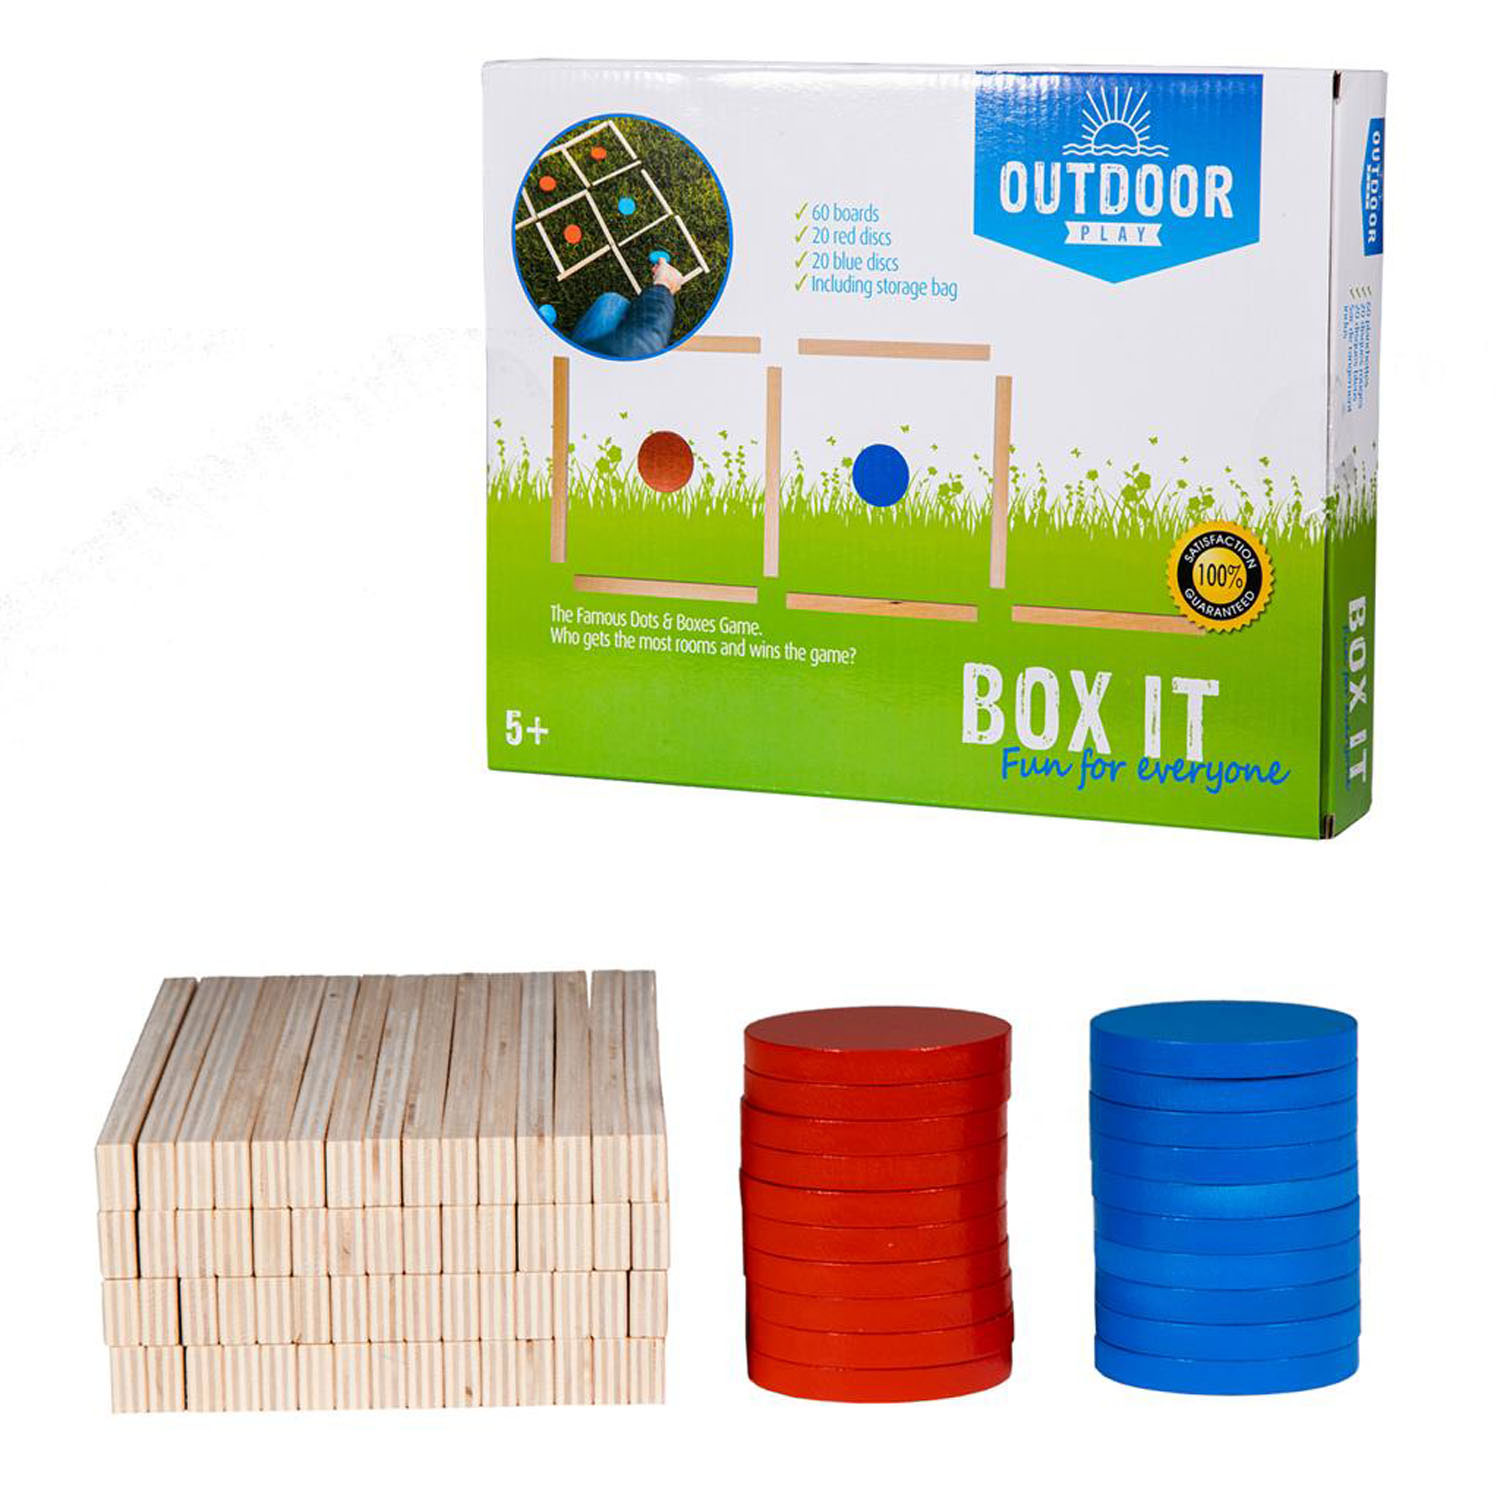 Outdoor Play Box It